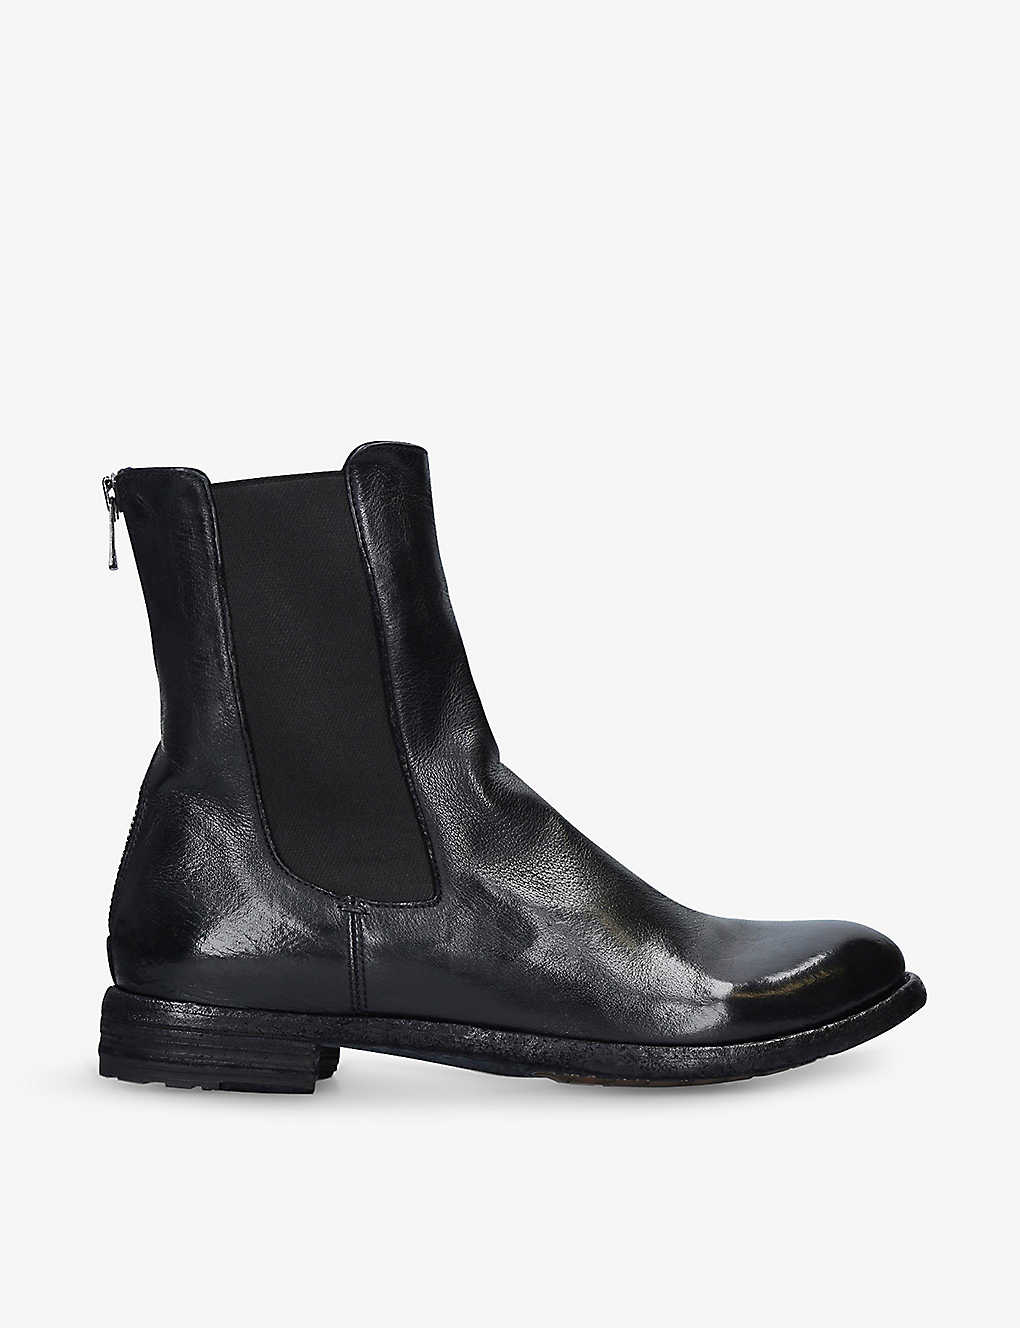 OFFICINE CREATIVE OFFICINE CREATIVE WOMEN'S BLACK LEXICON CHUNKY-SOLE LEATHER BOOTS